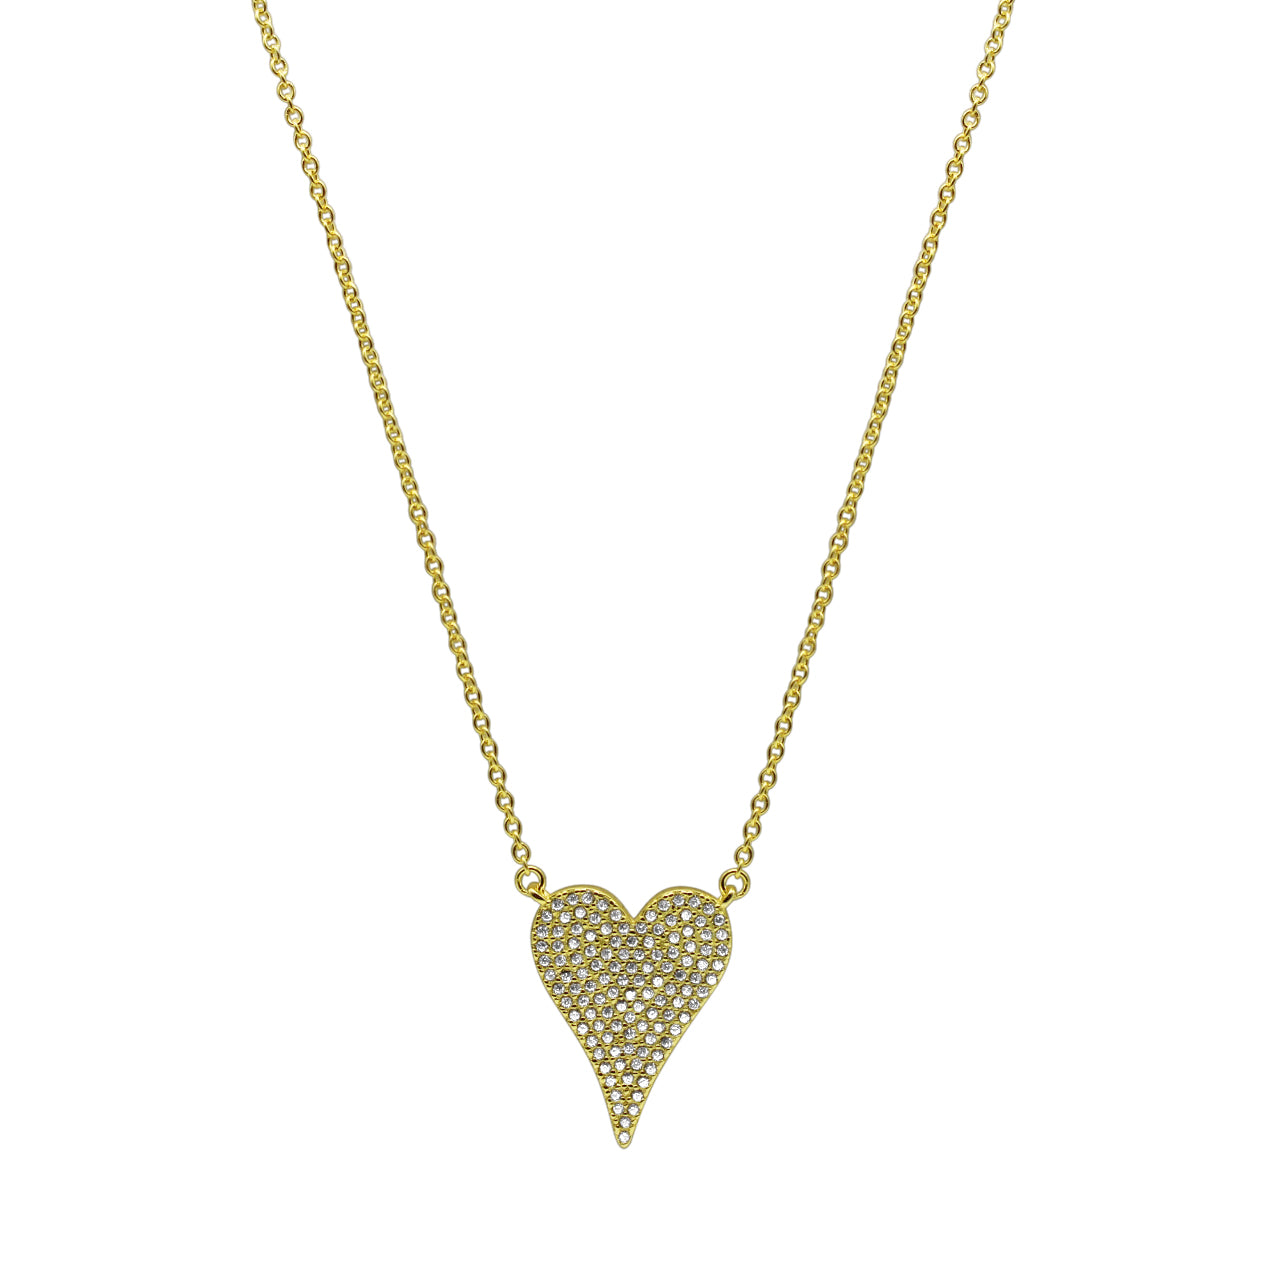 Dripping CZ Heart Necklace